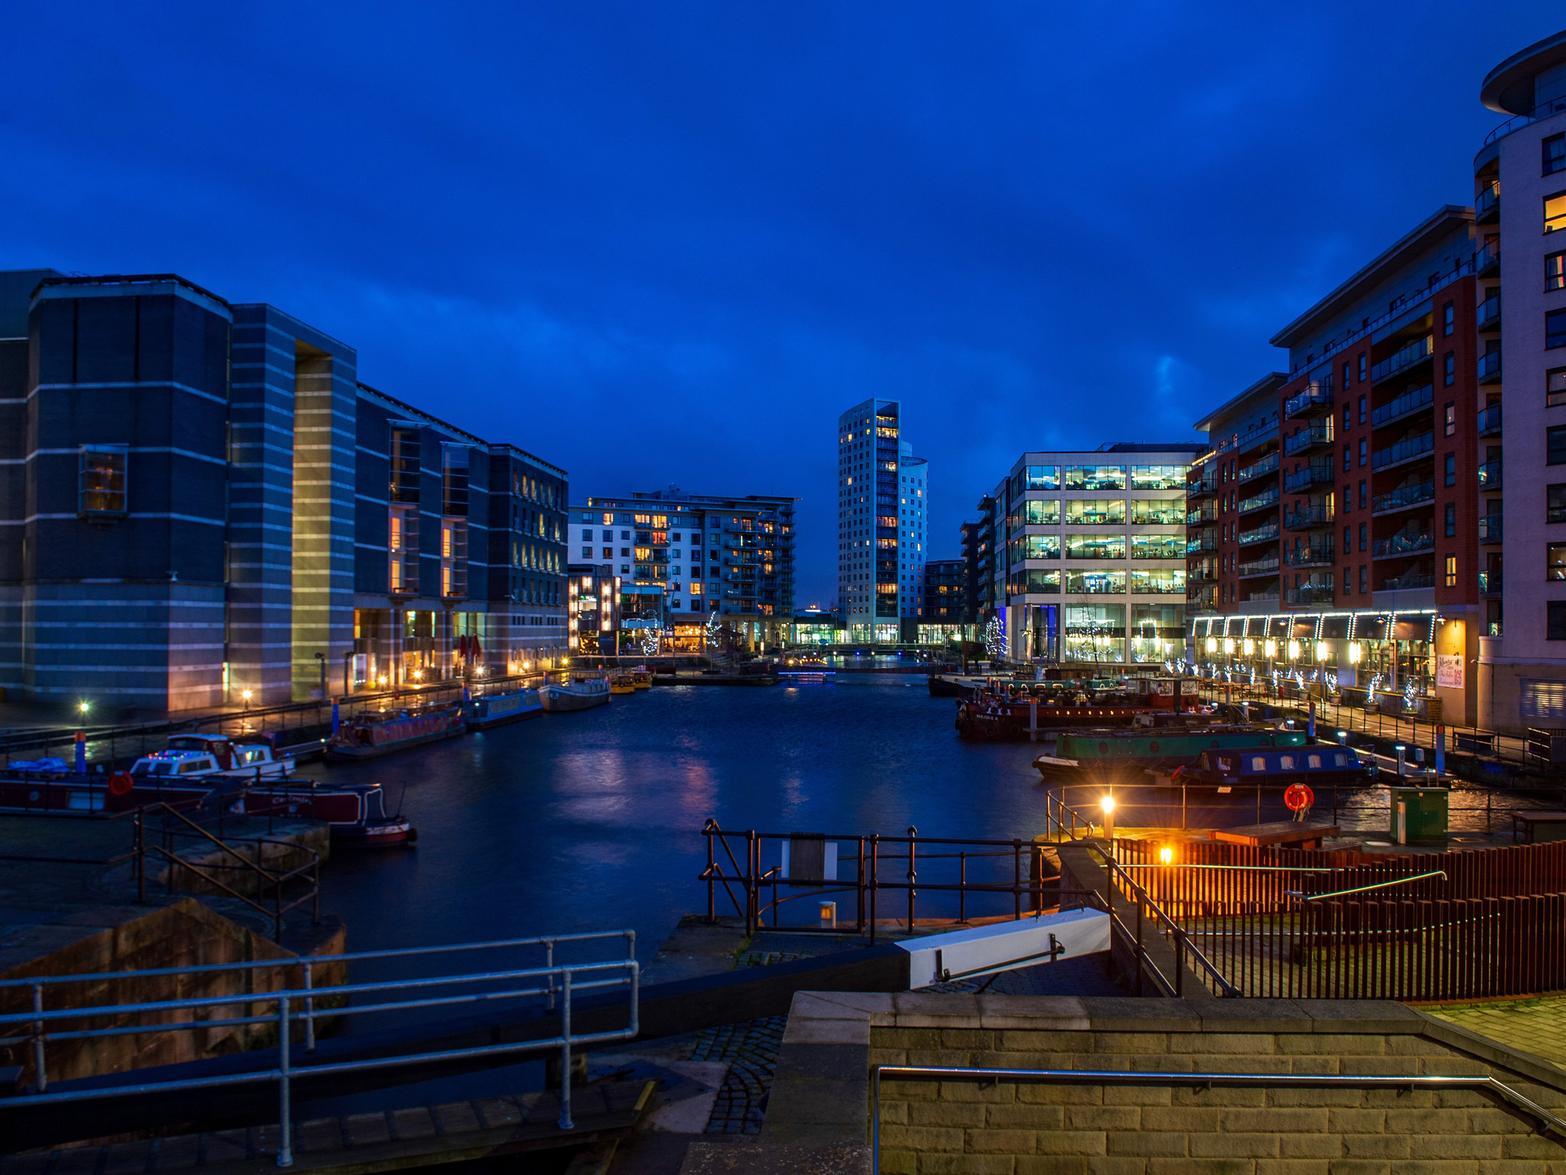 Leeds Dock and the Armouries.